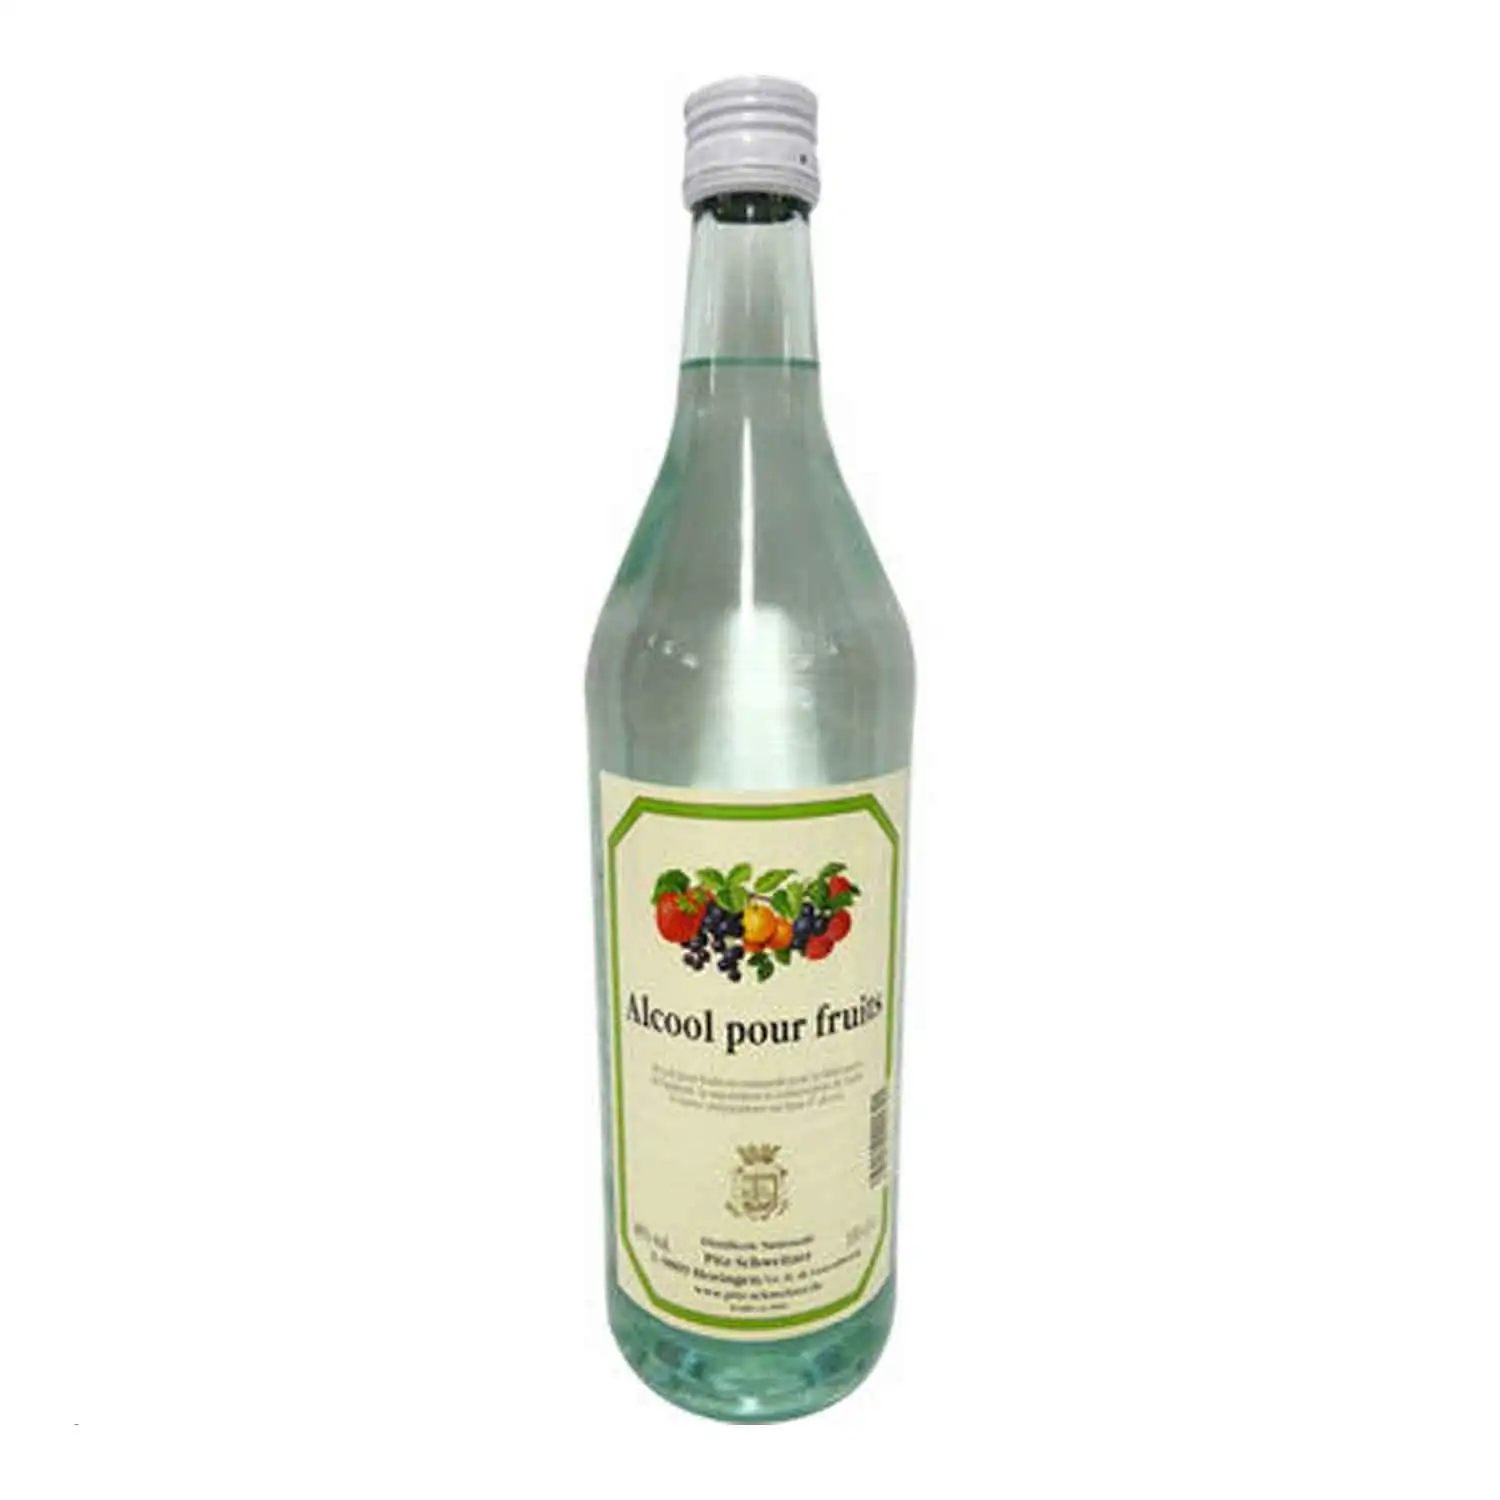 Alcohol for fruits 1l Alc 40% - Buy at Real Tobacco